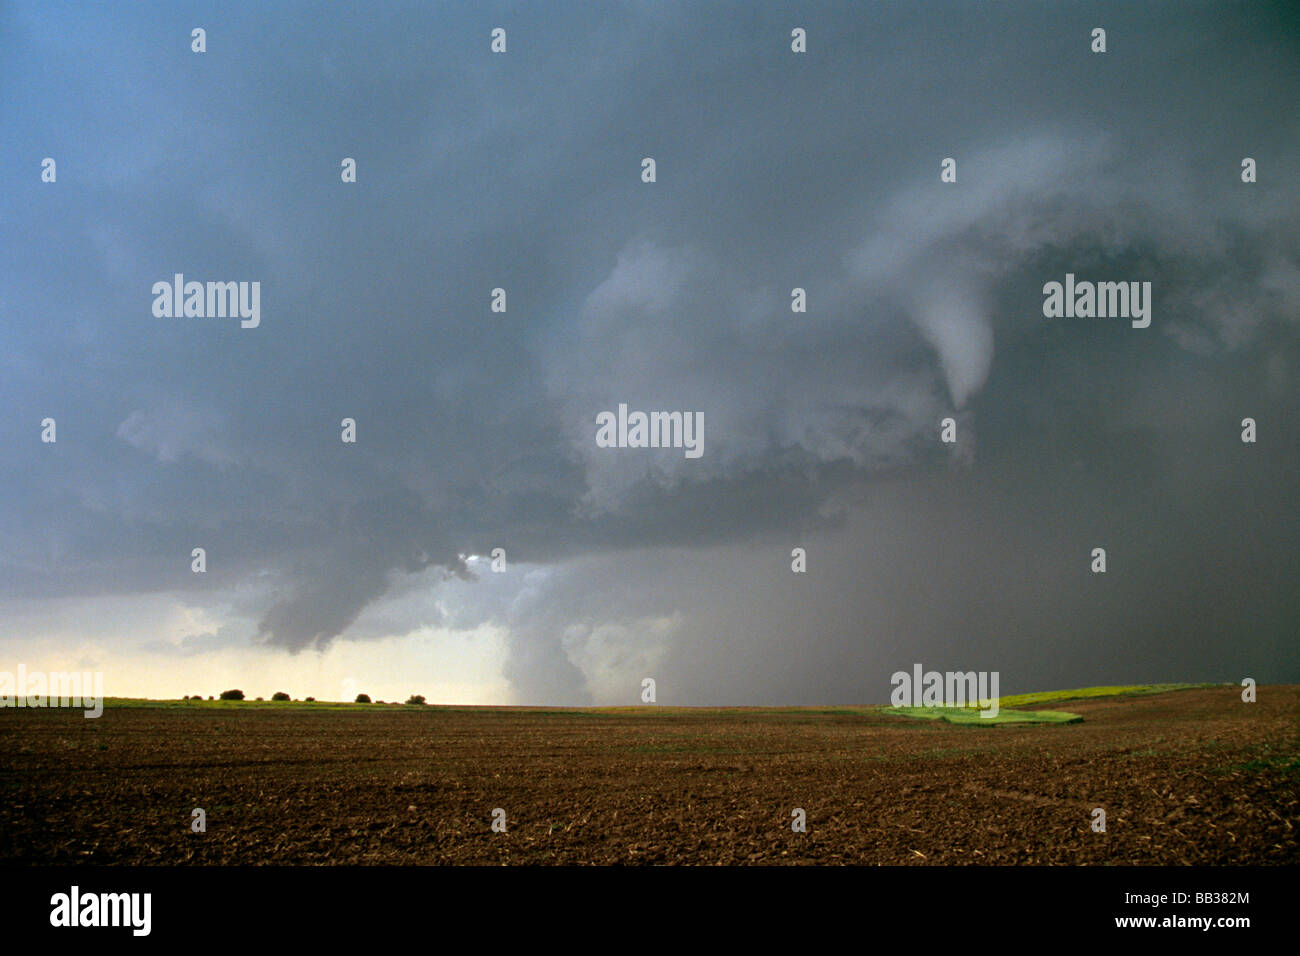 A funnel cloud in the foreground with a large tornado on the ground at the rear centre of the image. Kansas, USA Stock Photo